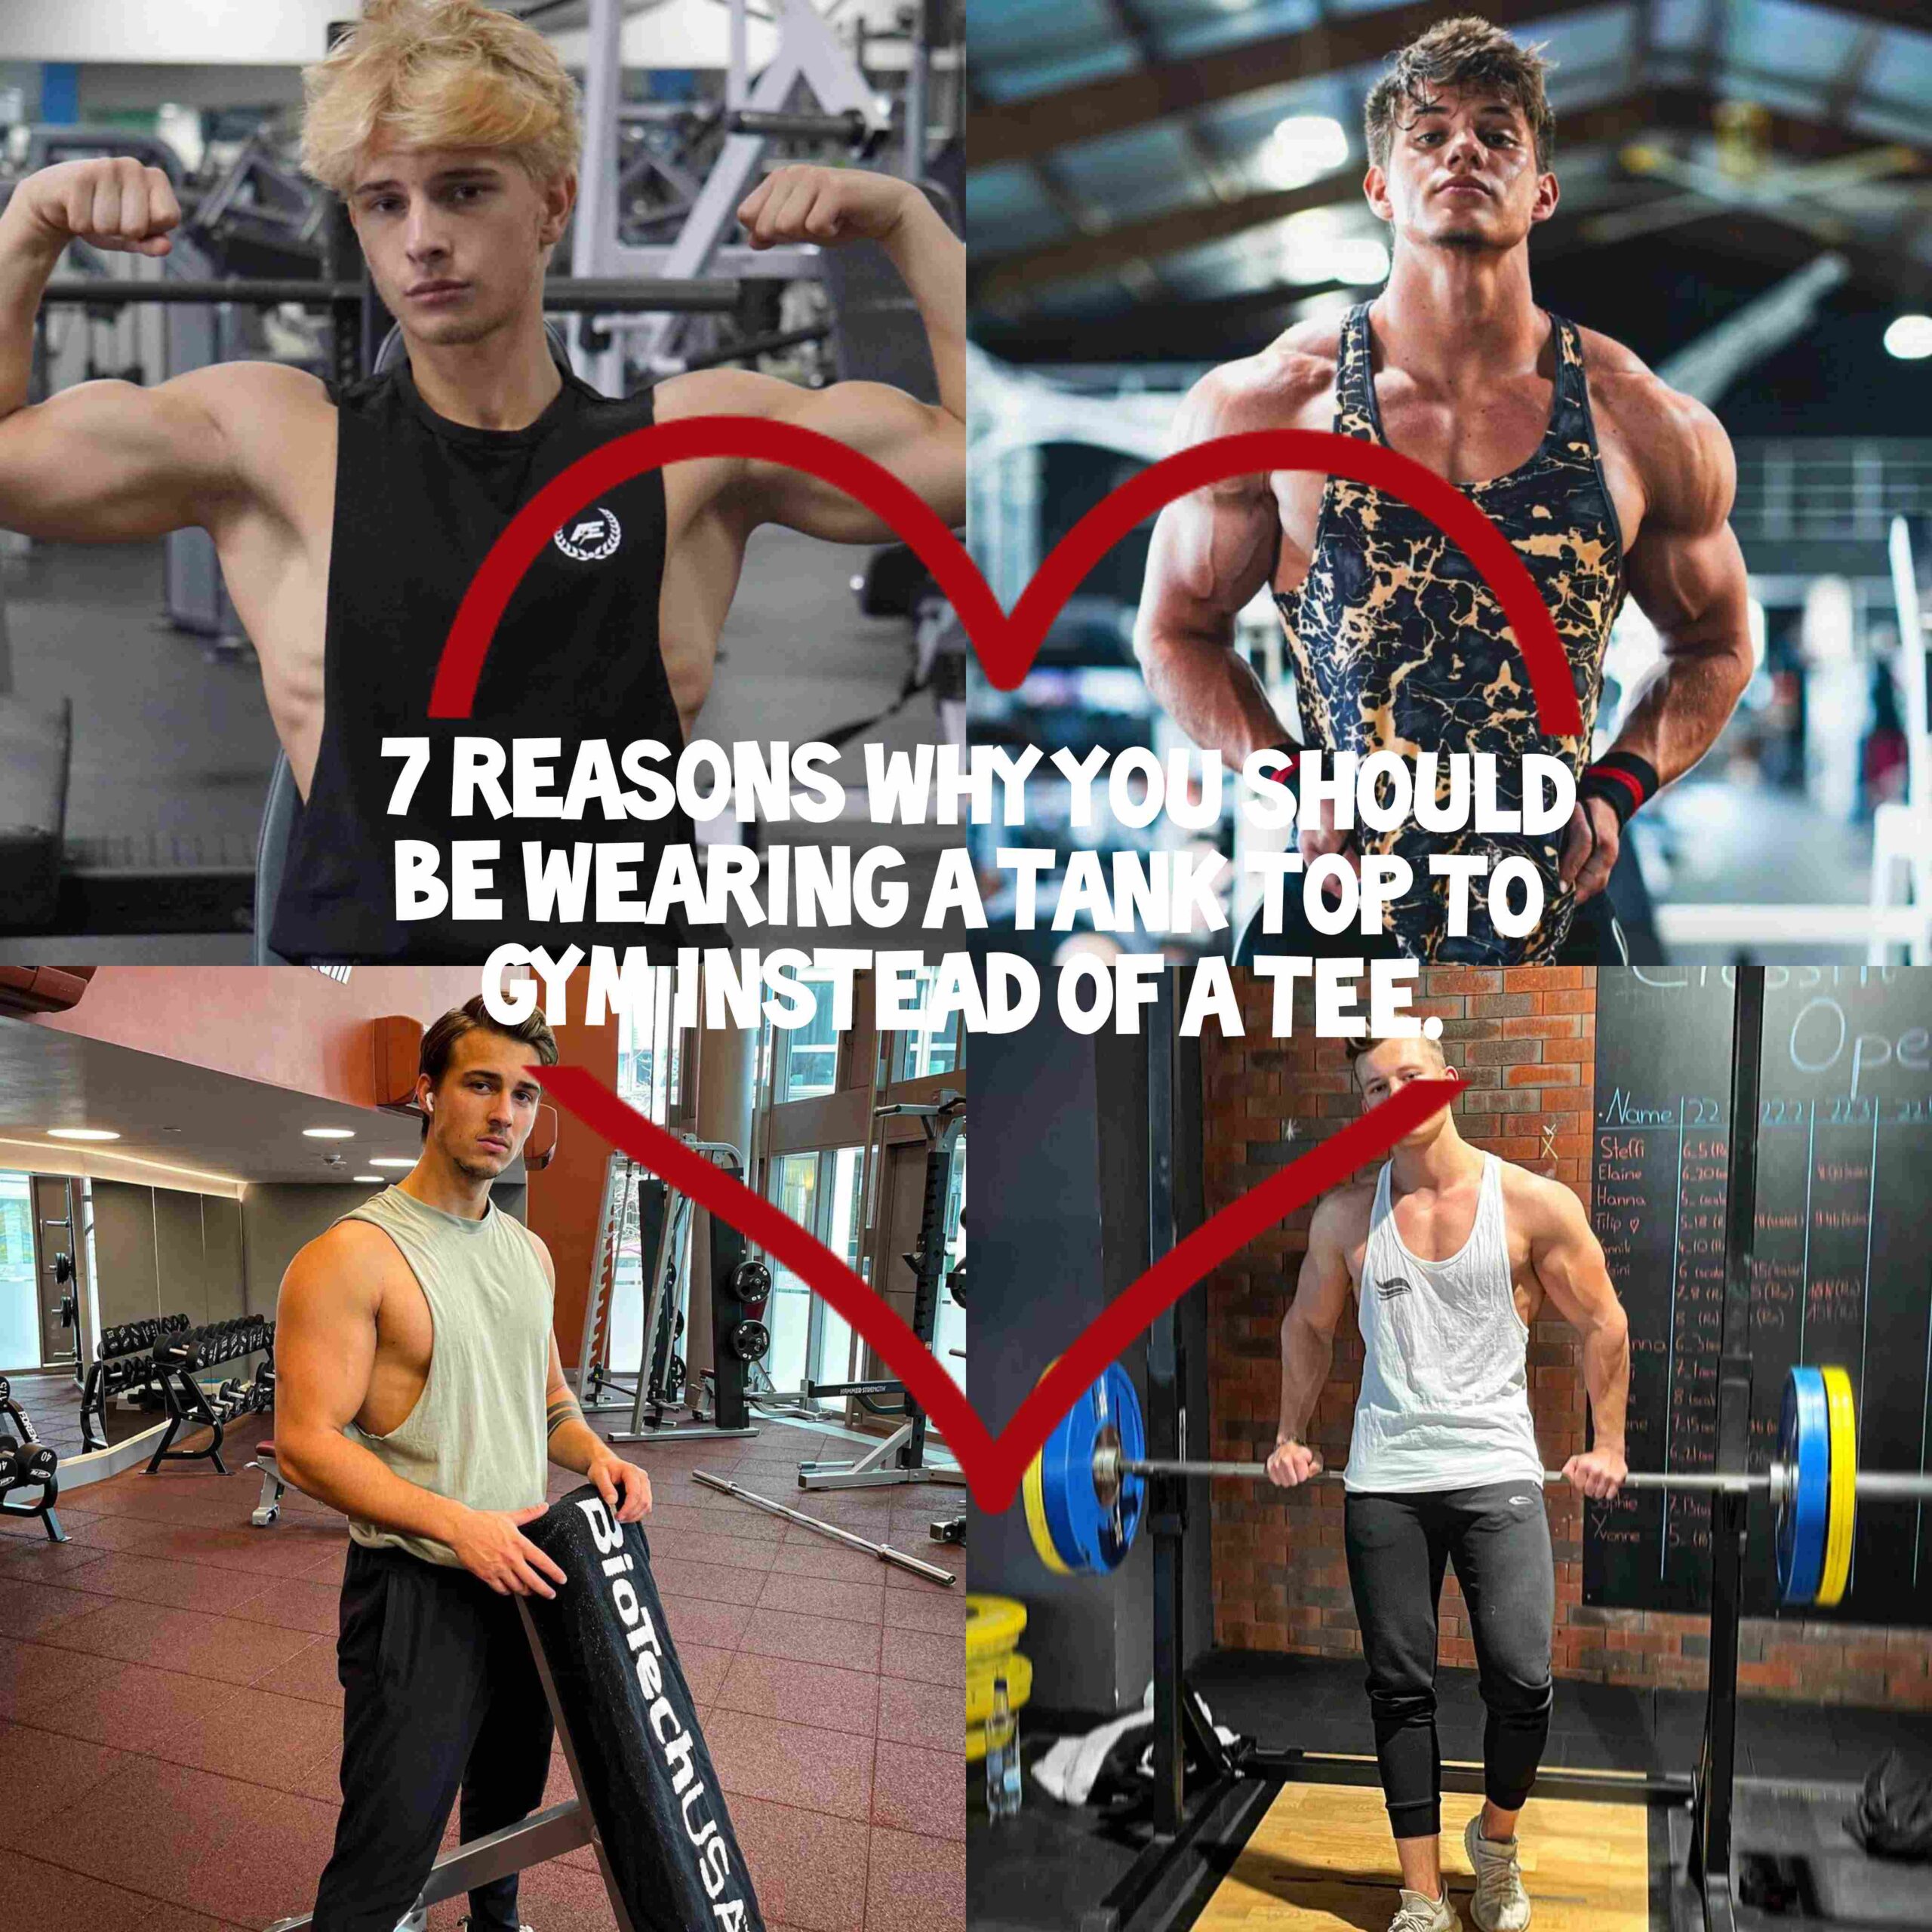 7reasons why you should wear a tank top to the gym